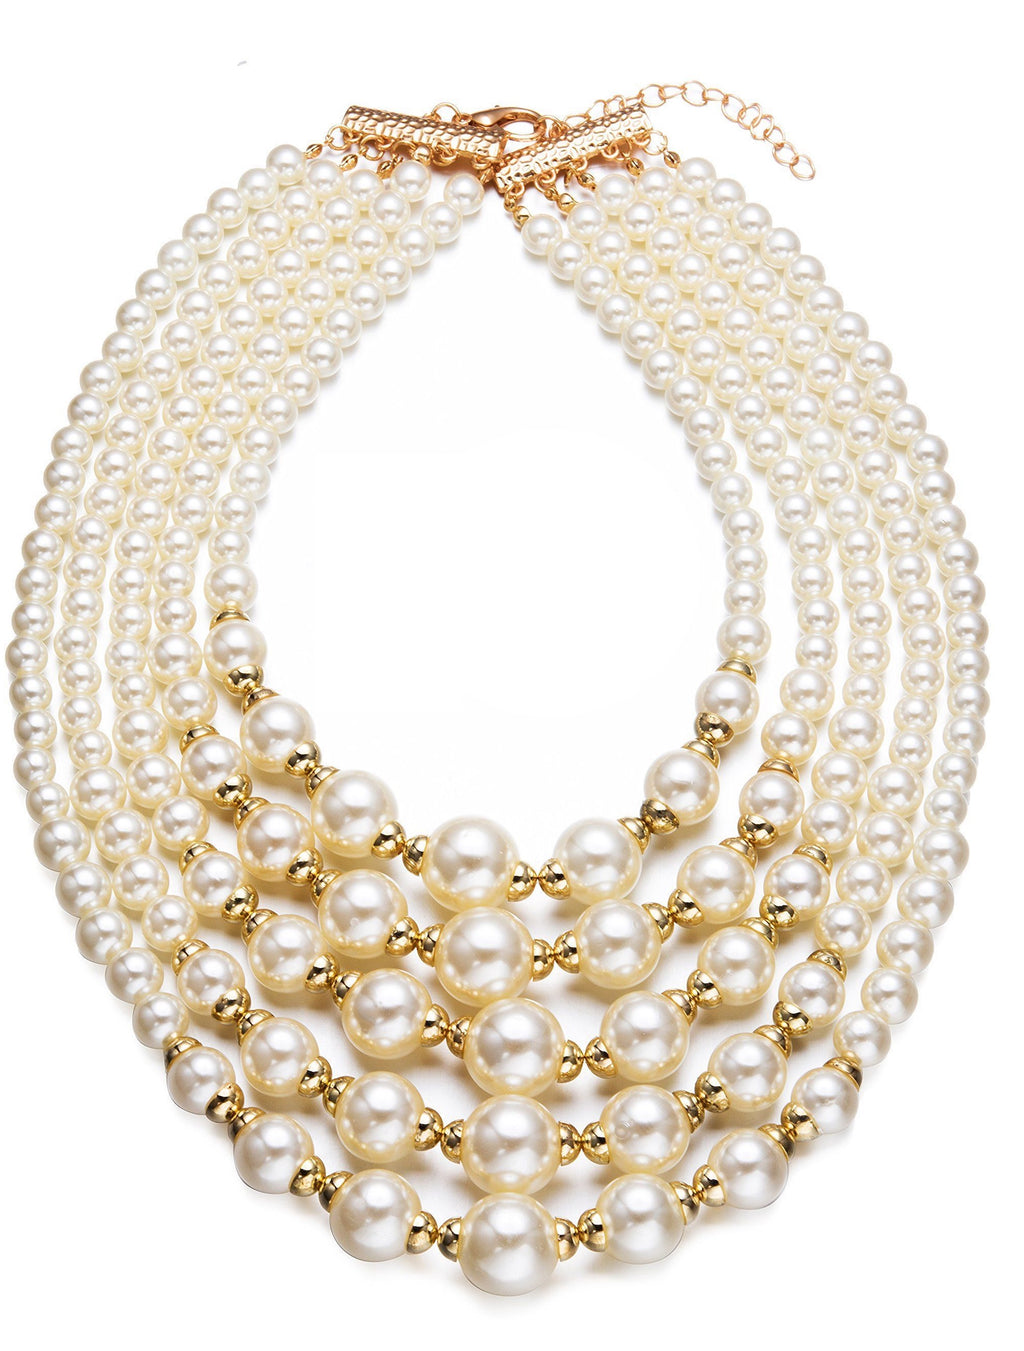 18k Gold Multi Layer Pearl Necklace